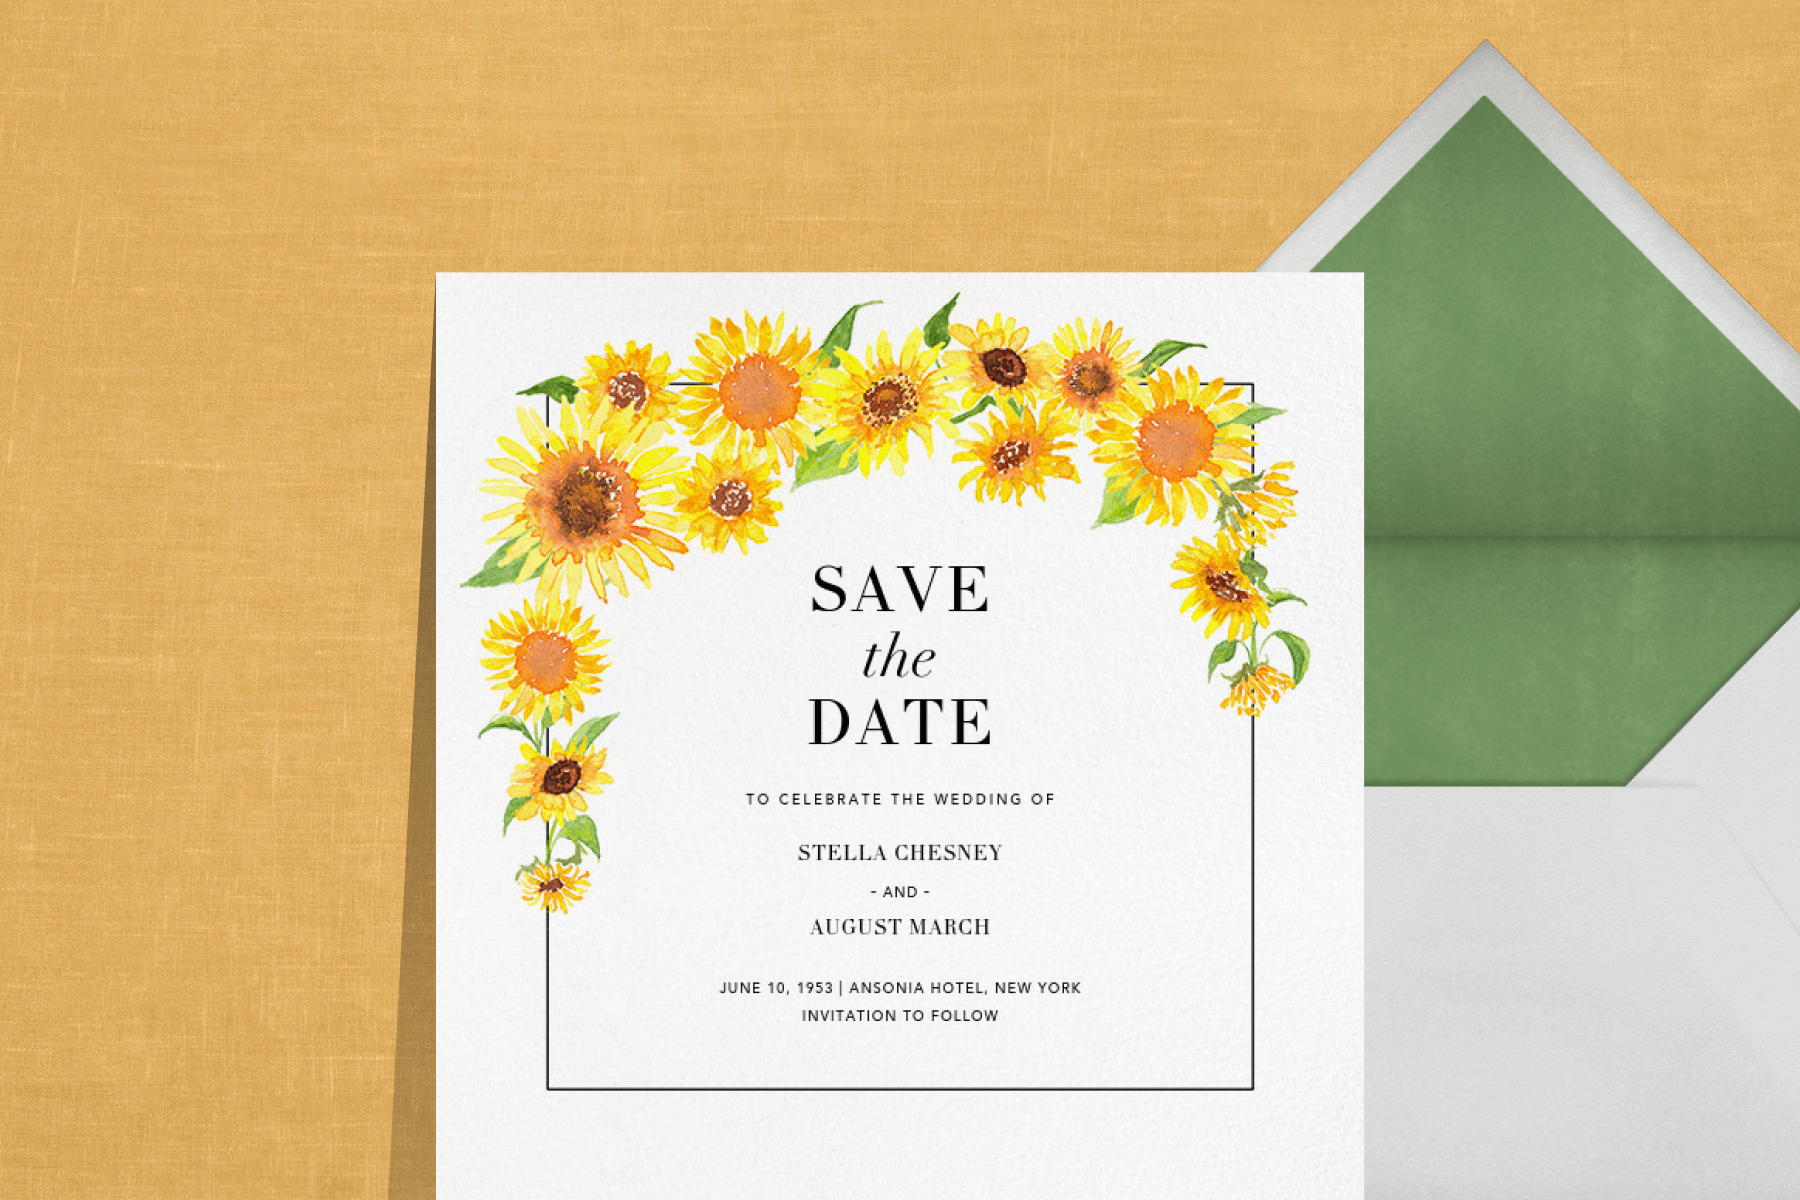 A save the date with a sunflower border.